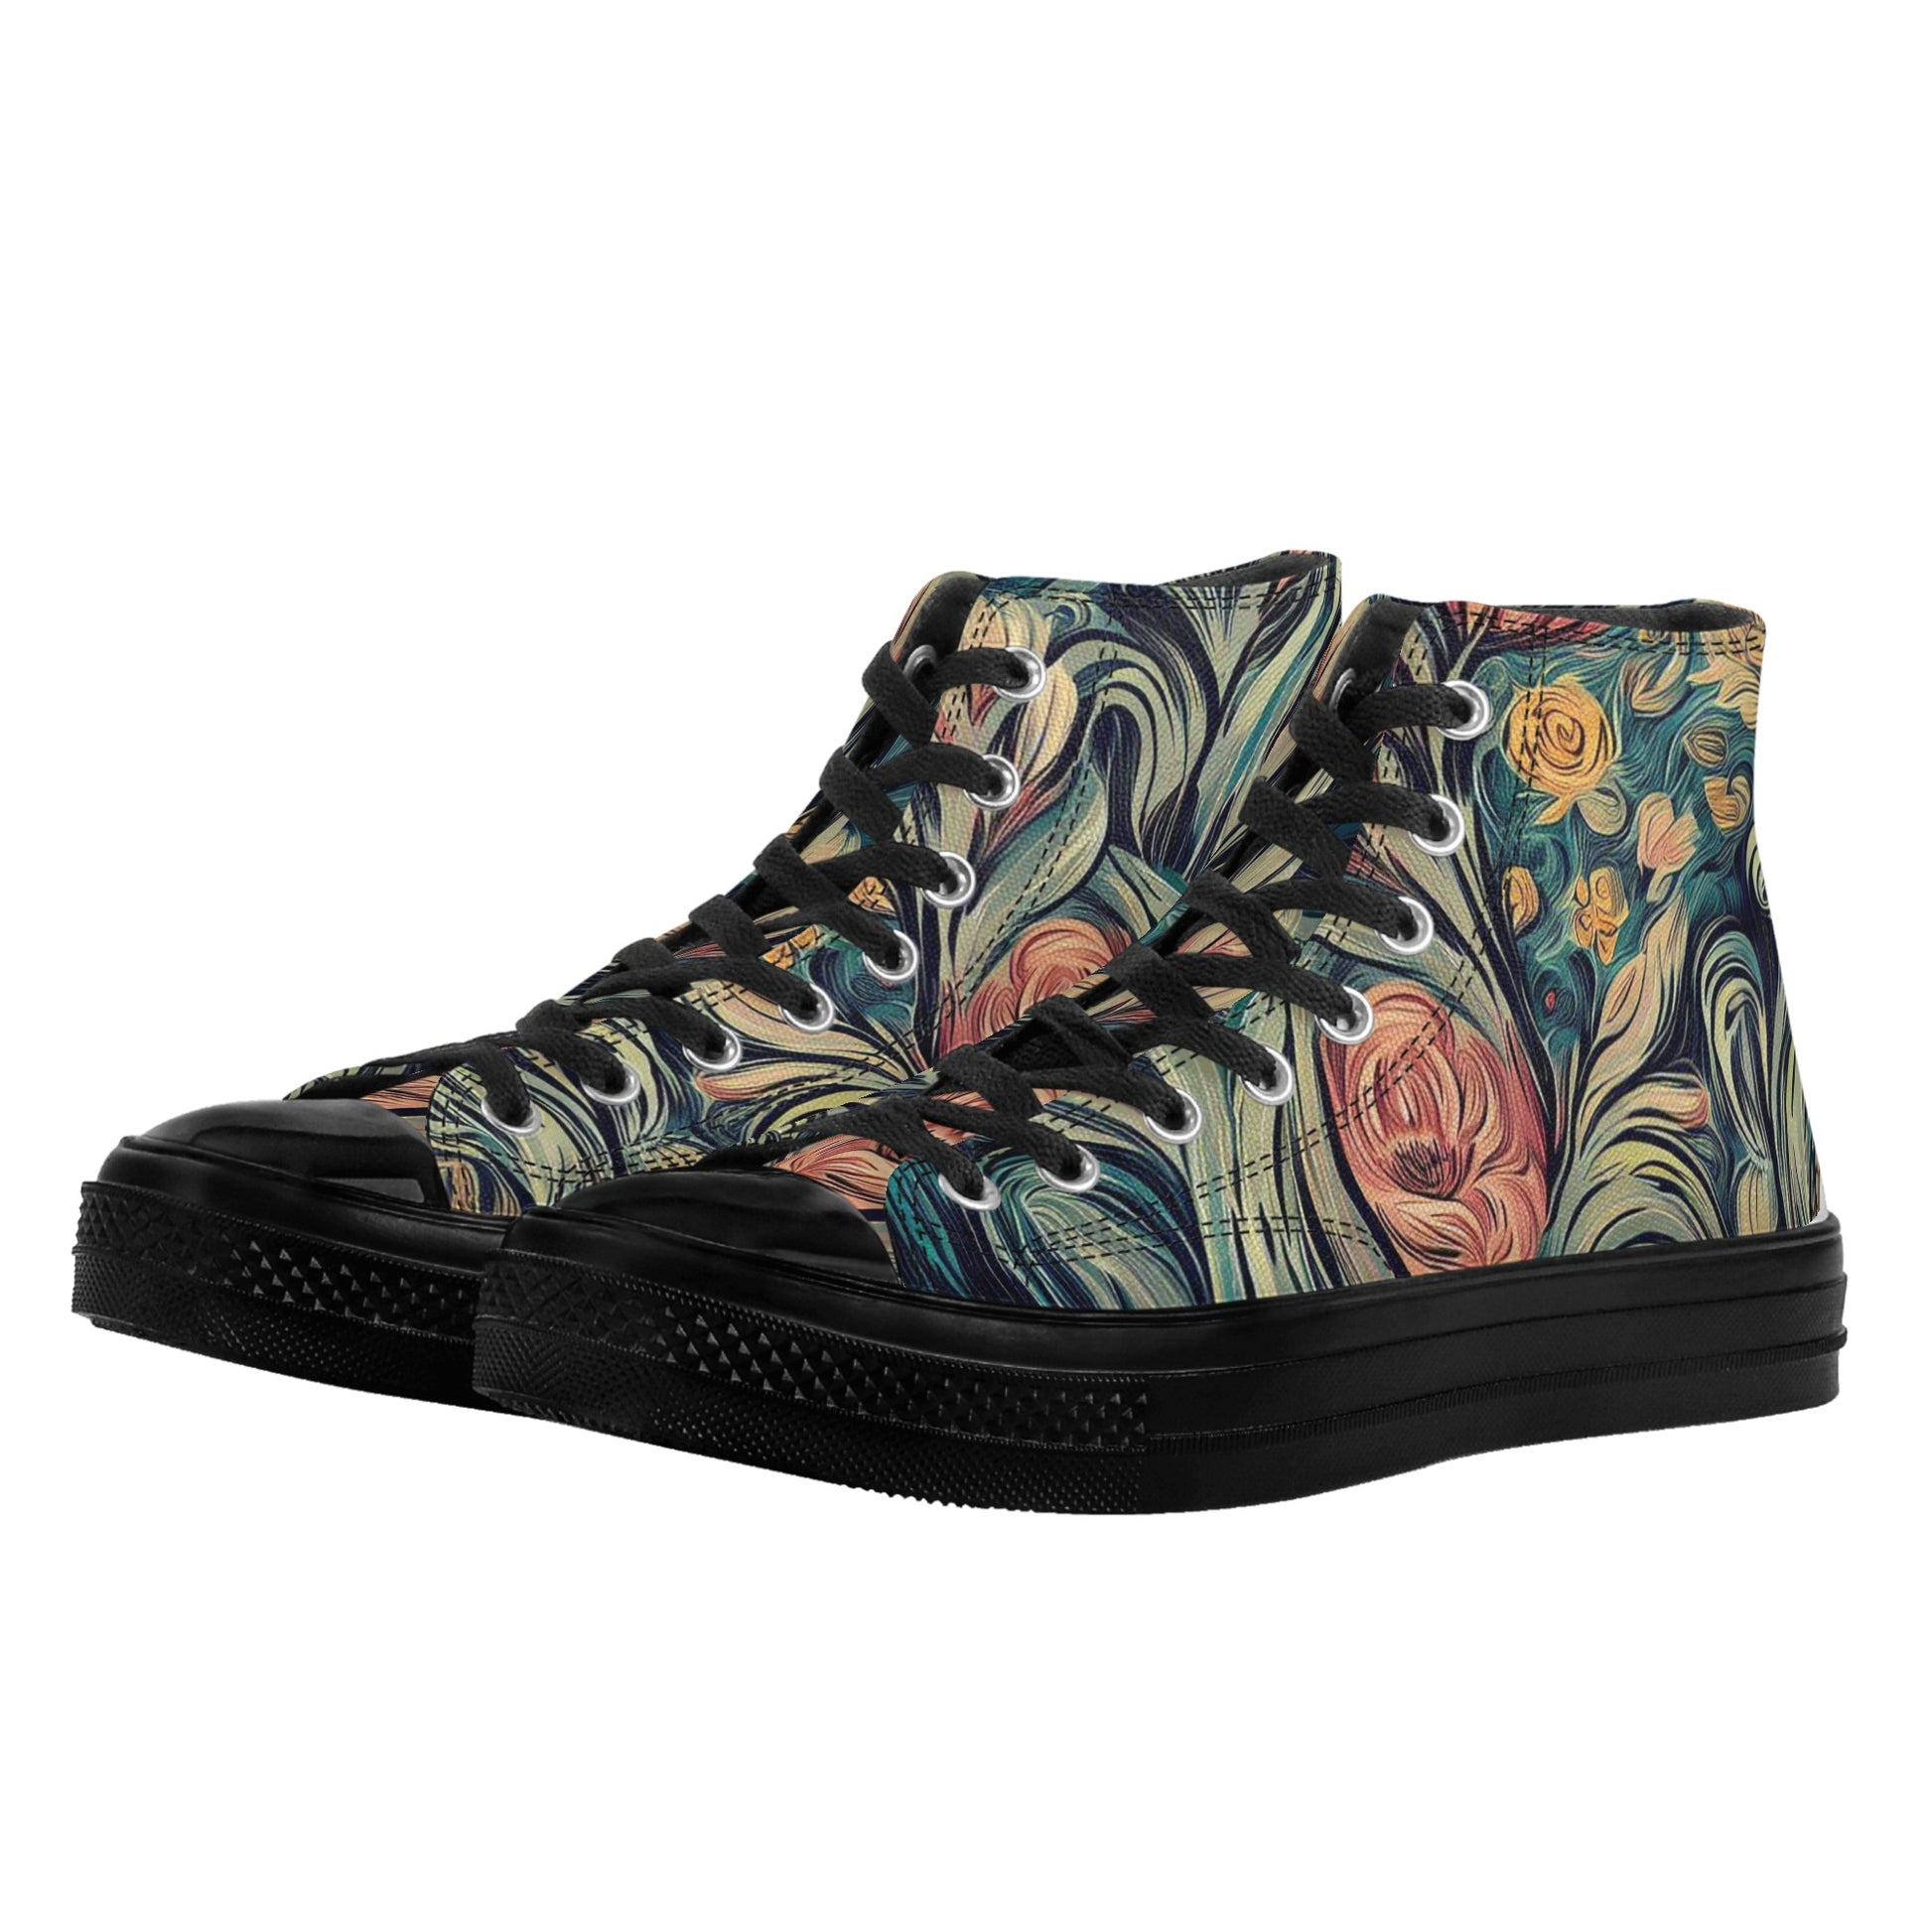 Main Product: Van Gogh Women's Classic Black High-Top Canvas Shoes - Front View